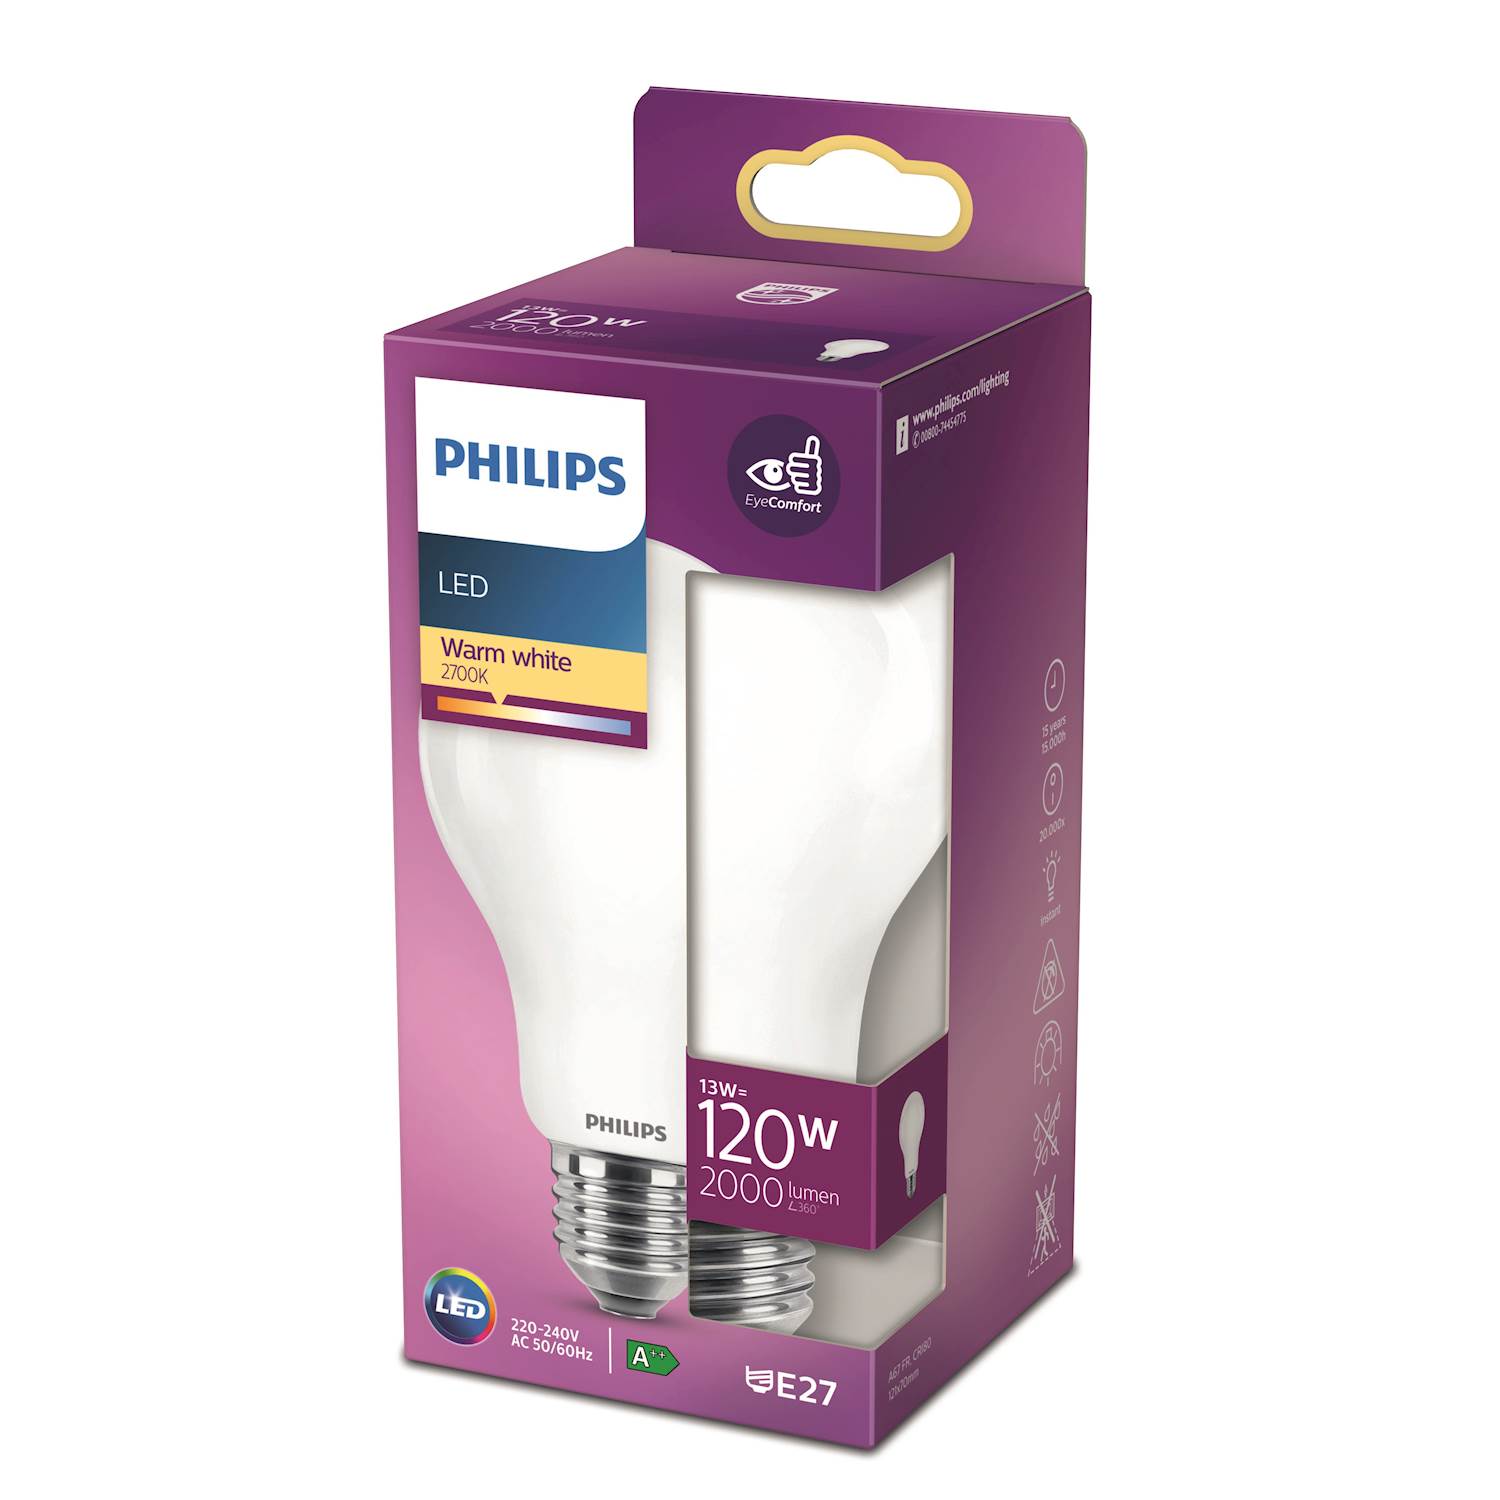 Philips LED Classic 120w norm e27 nd